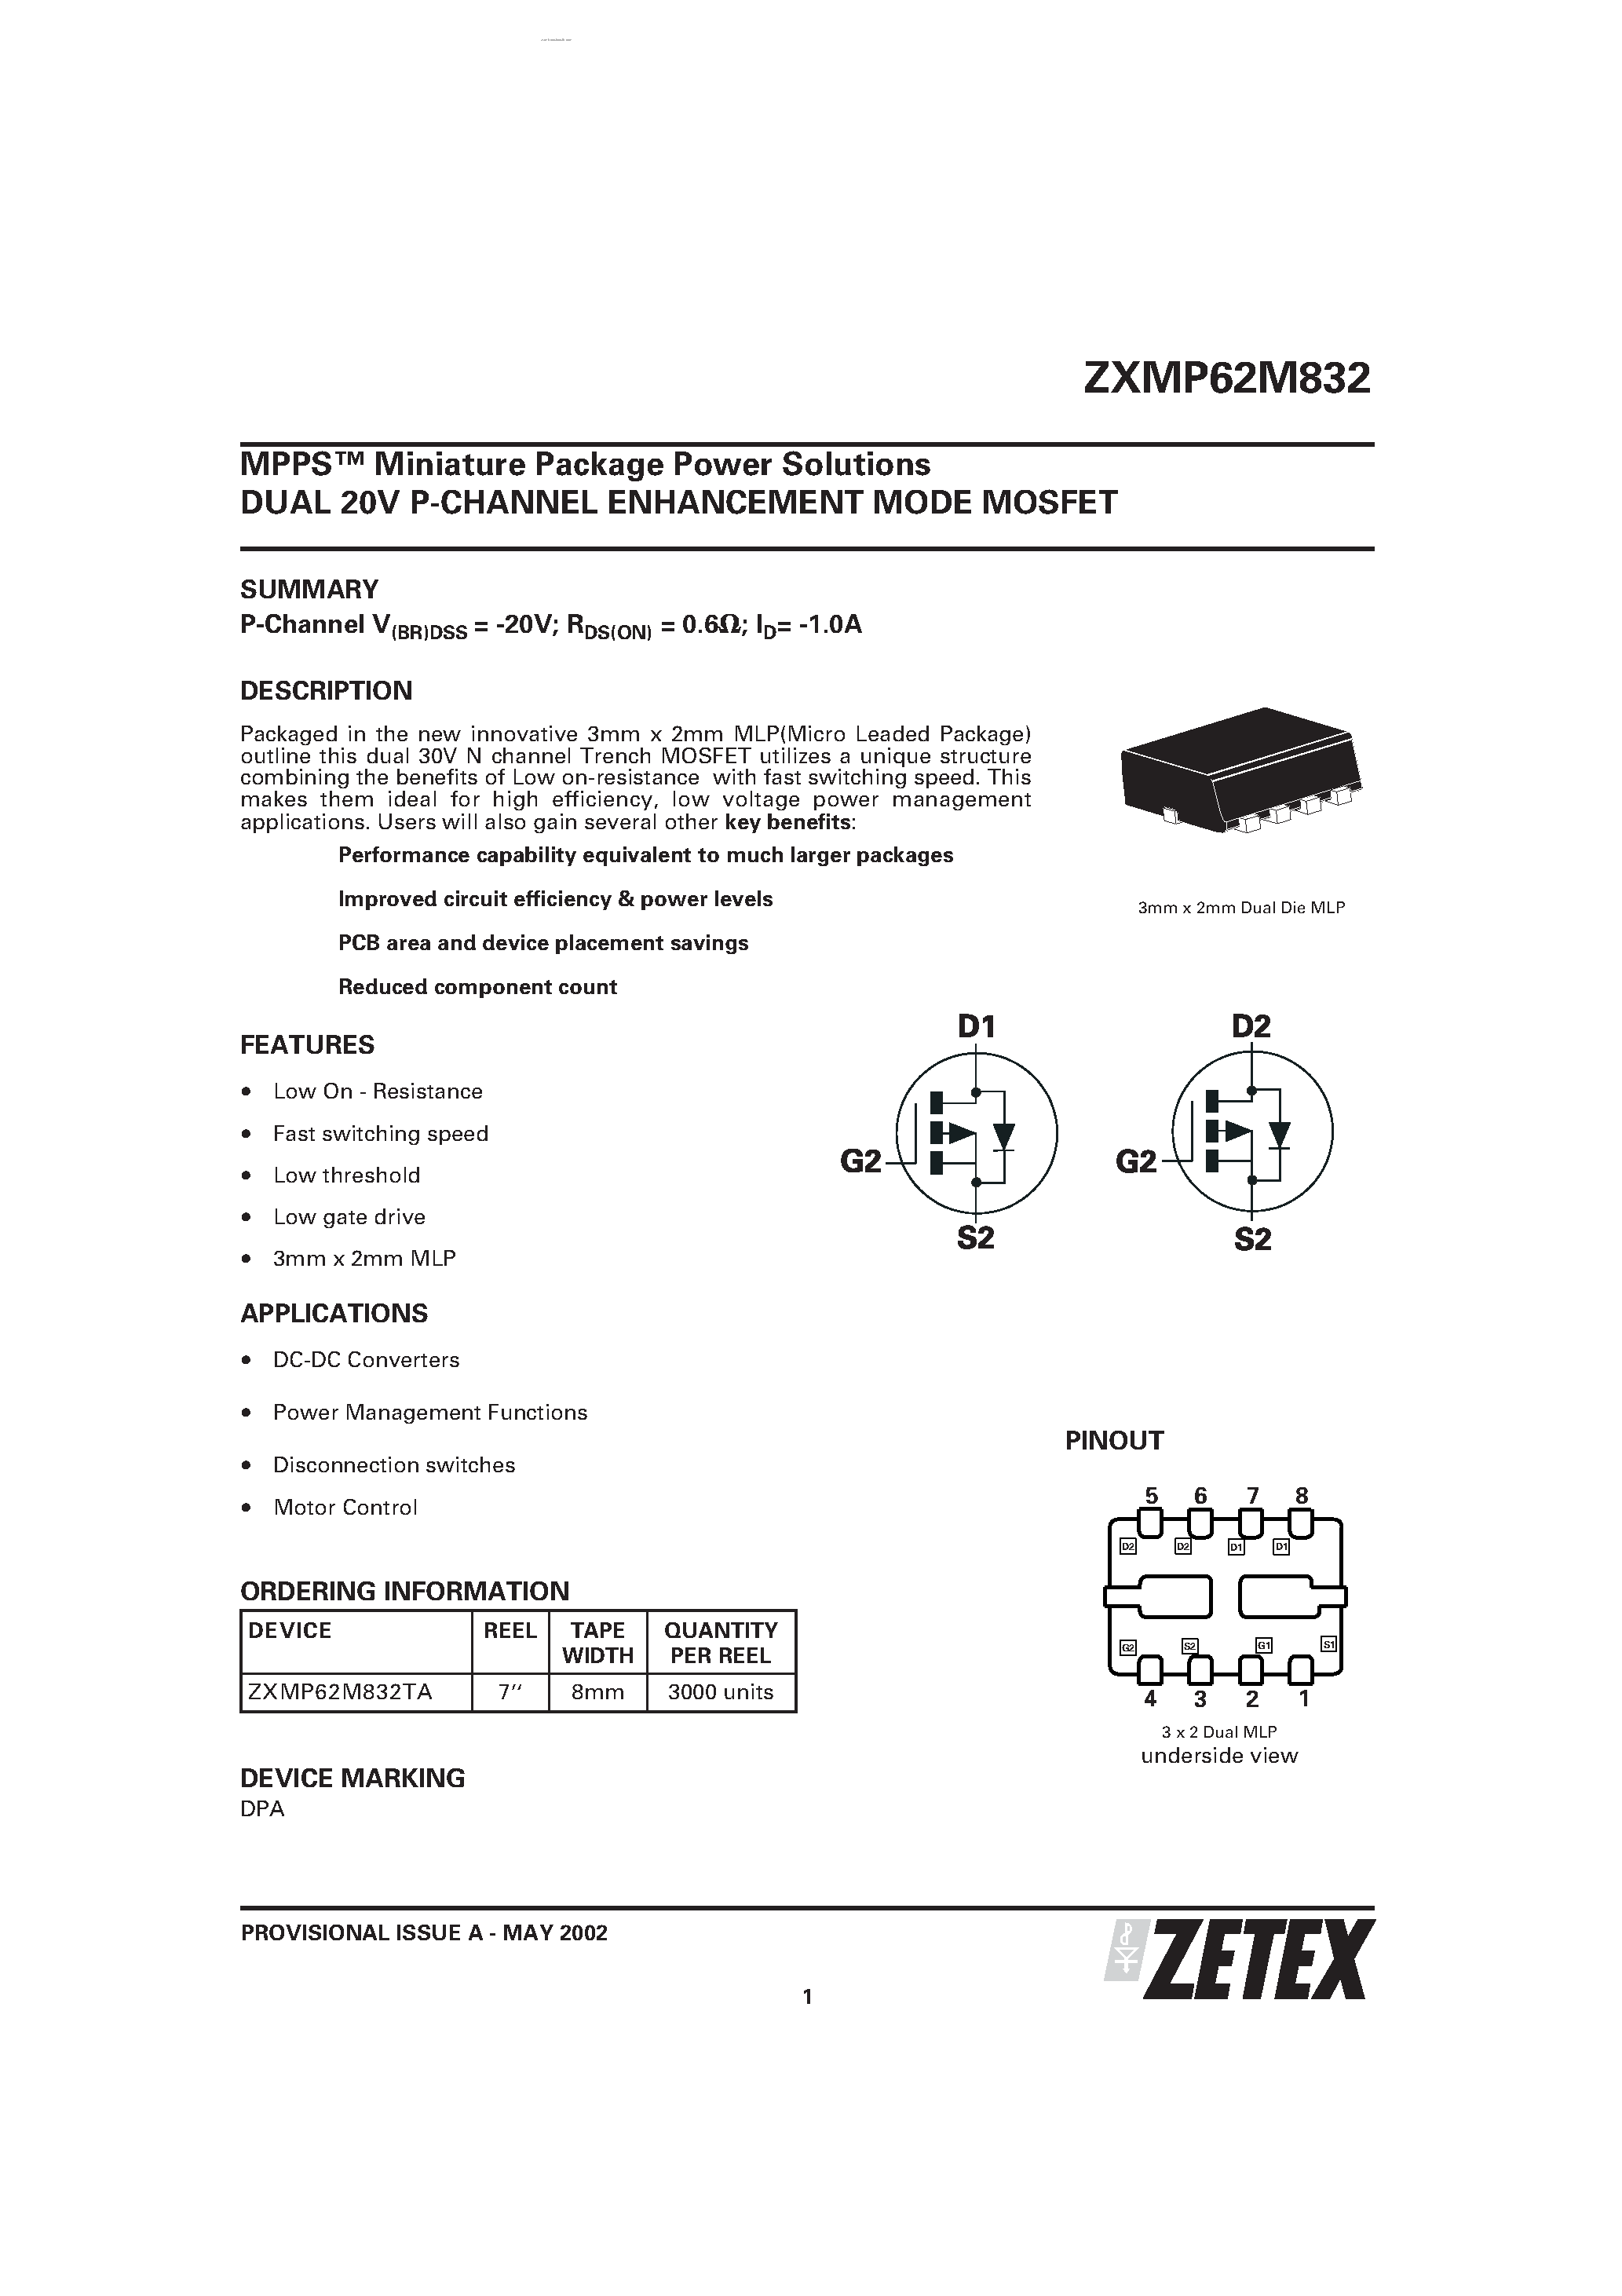 Даташит ZXMP62M832 - MPPS Miniature Package Power Solutions DUAL 20V P-CHANNEL ENHANCEMENT MODE MOSFET страница 1